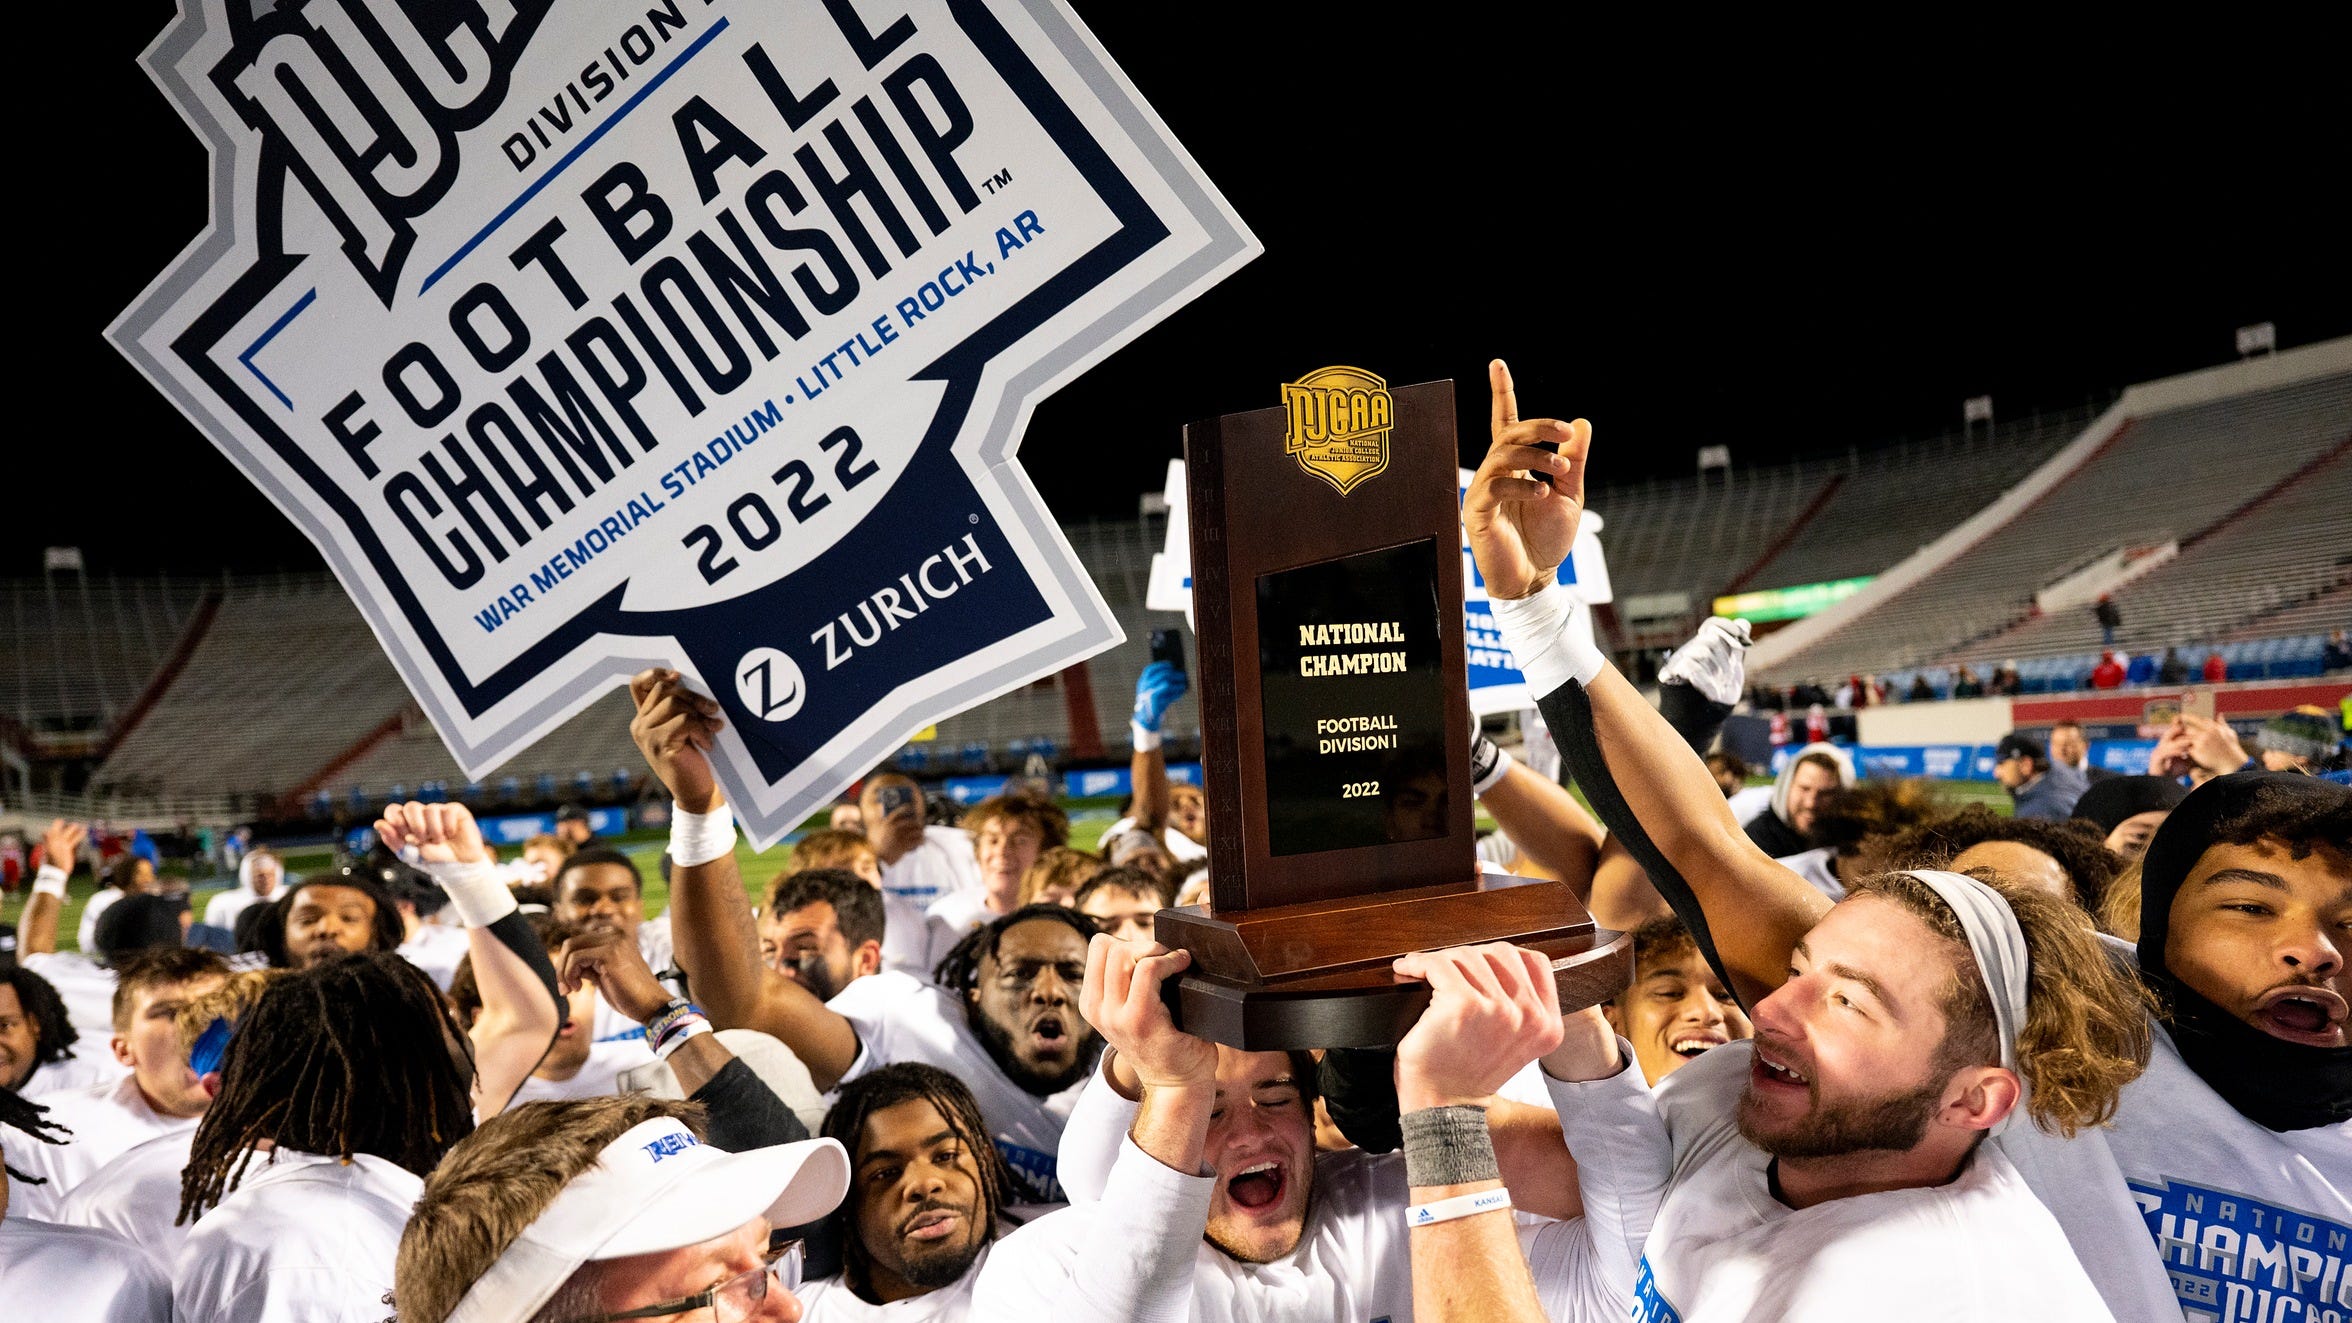 Iowa Western football dominanted Hutchinson to win second national title